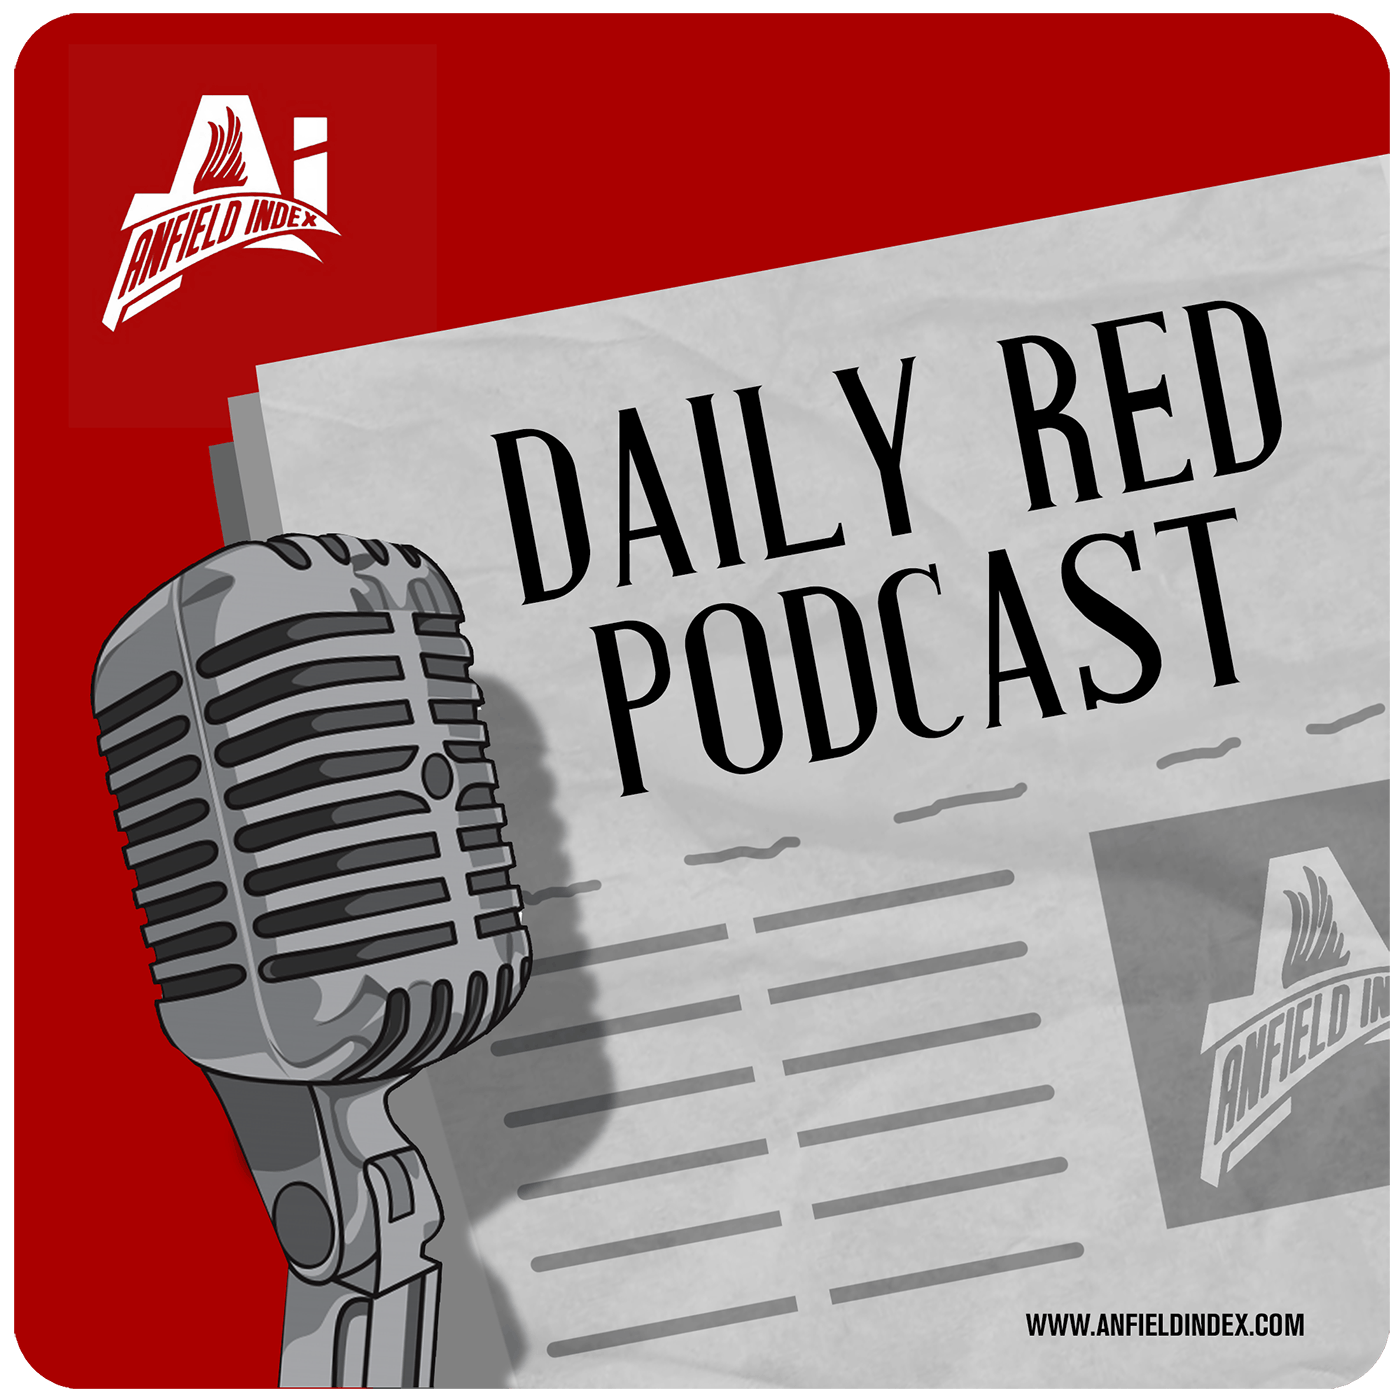 Sponsorship Debate - Daily Red Podcast